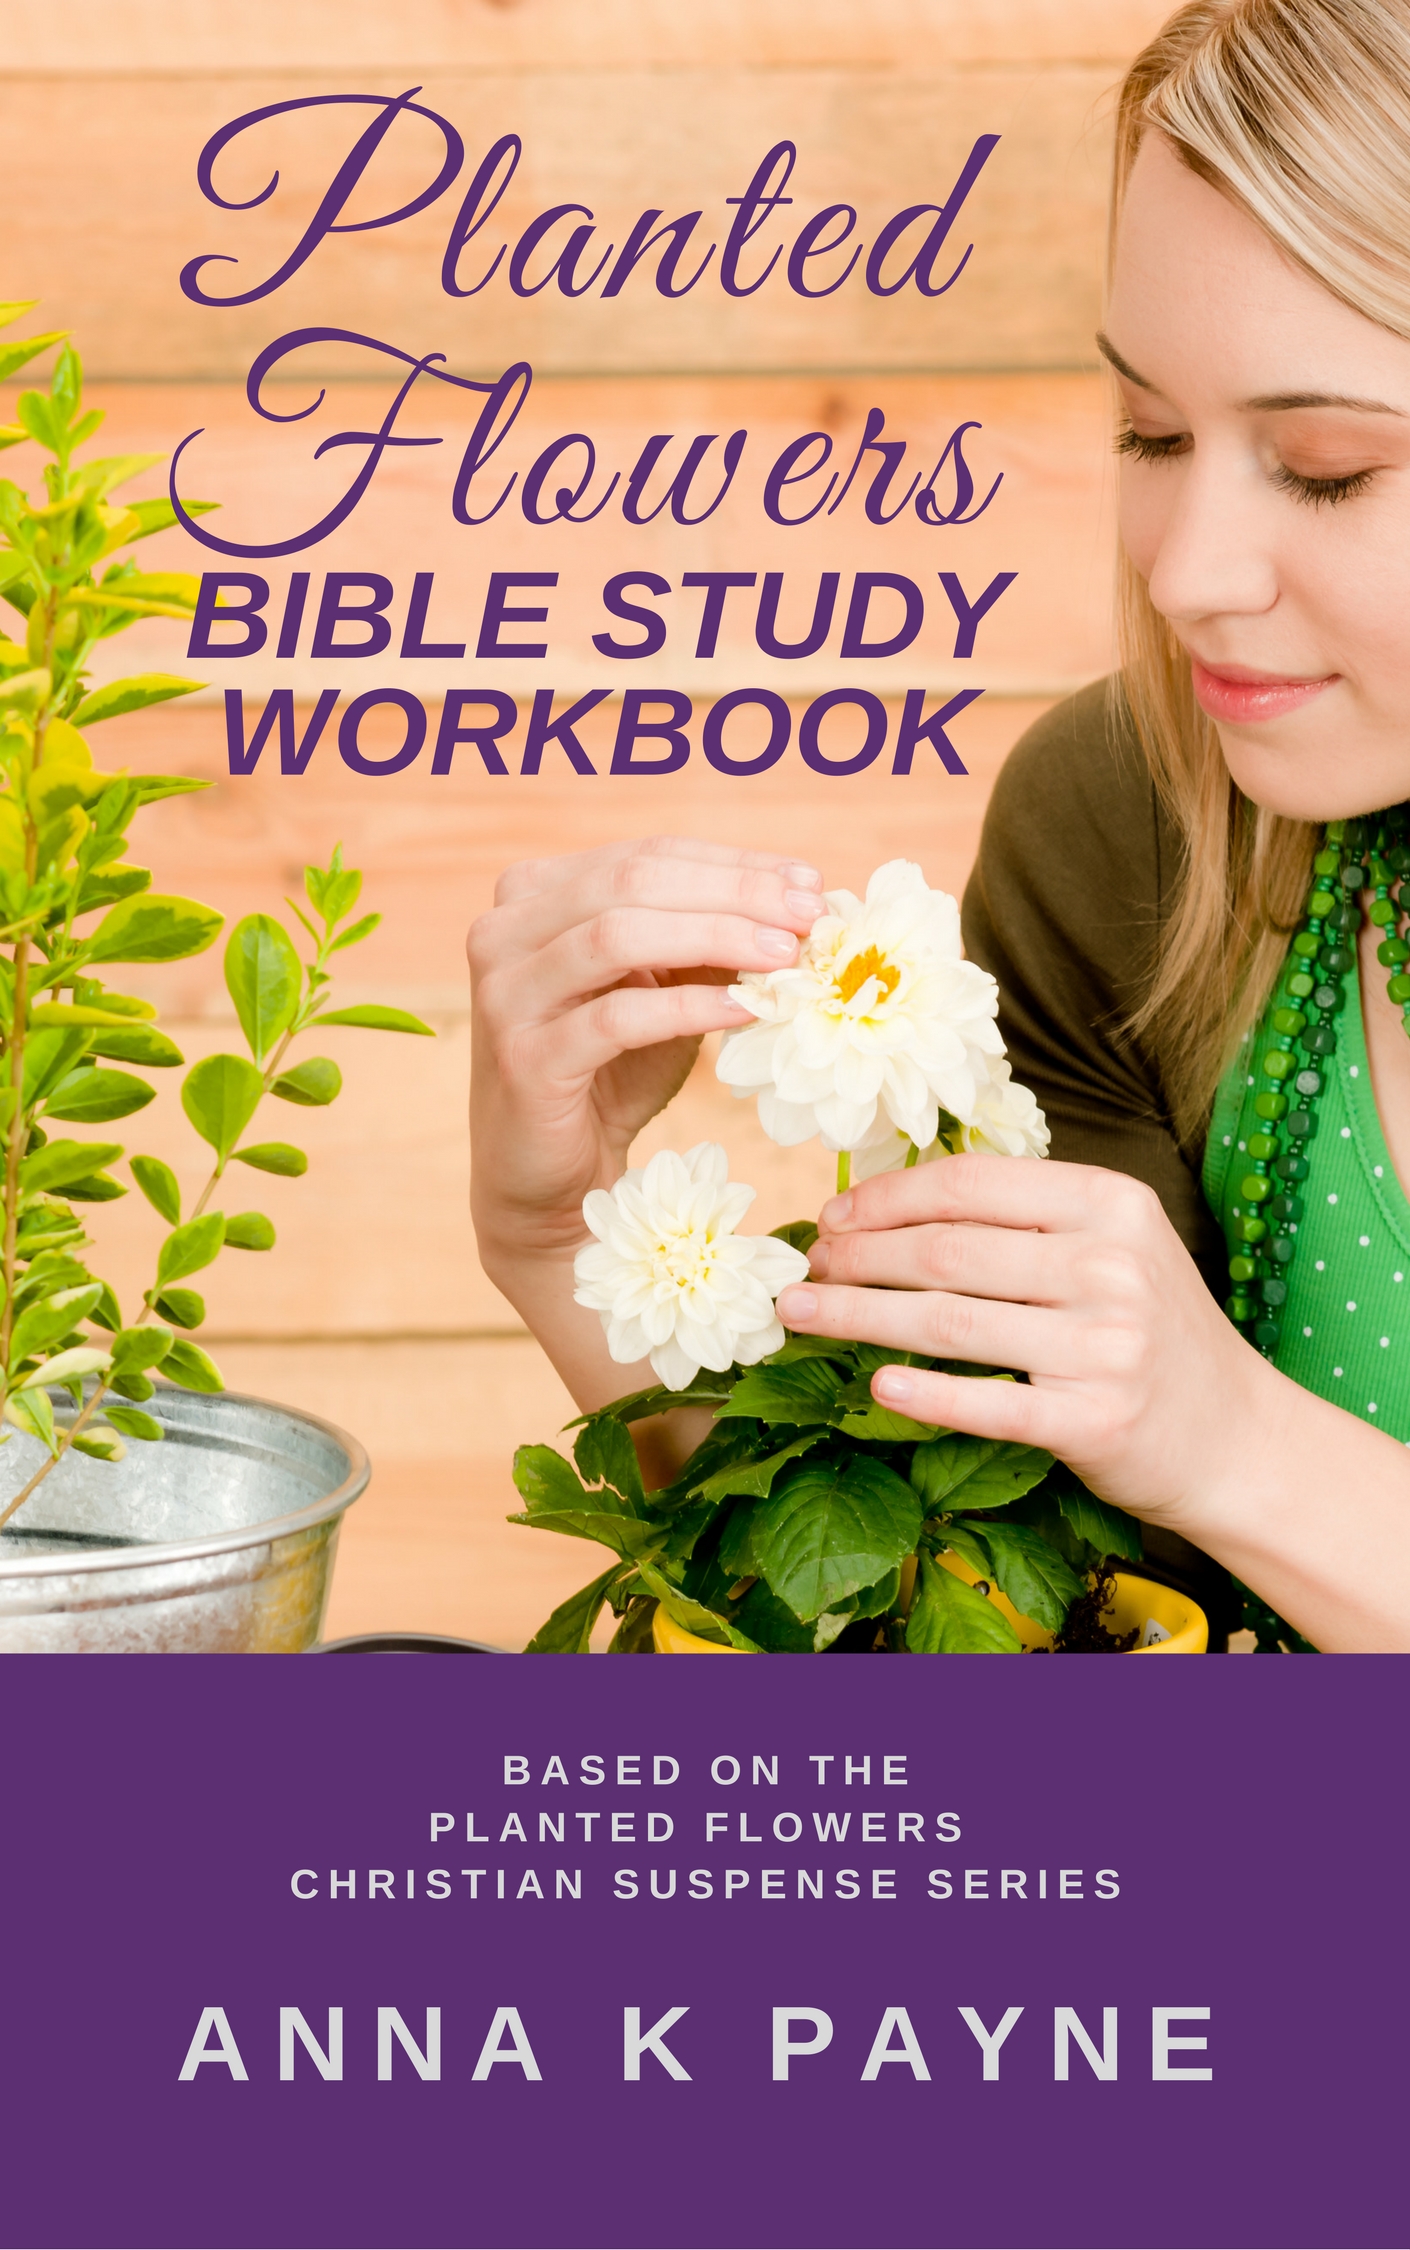 The Planted Flowers Bible Study Workbook Launches